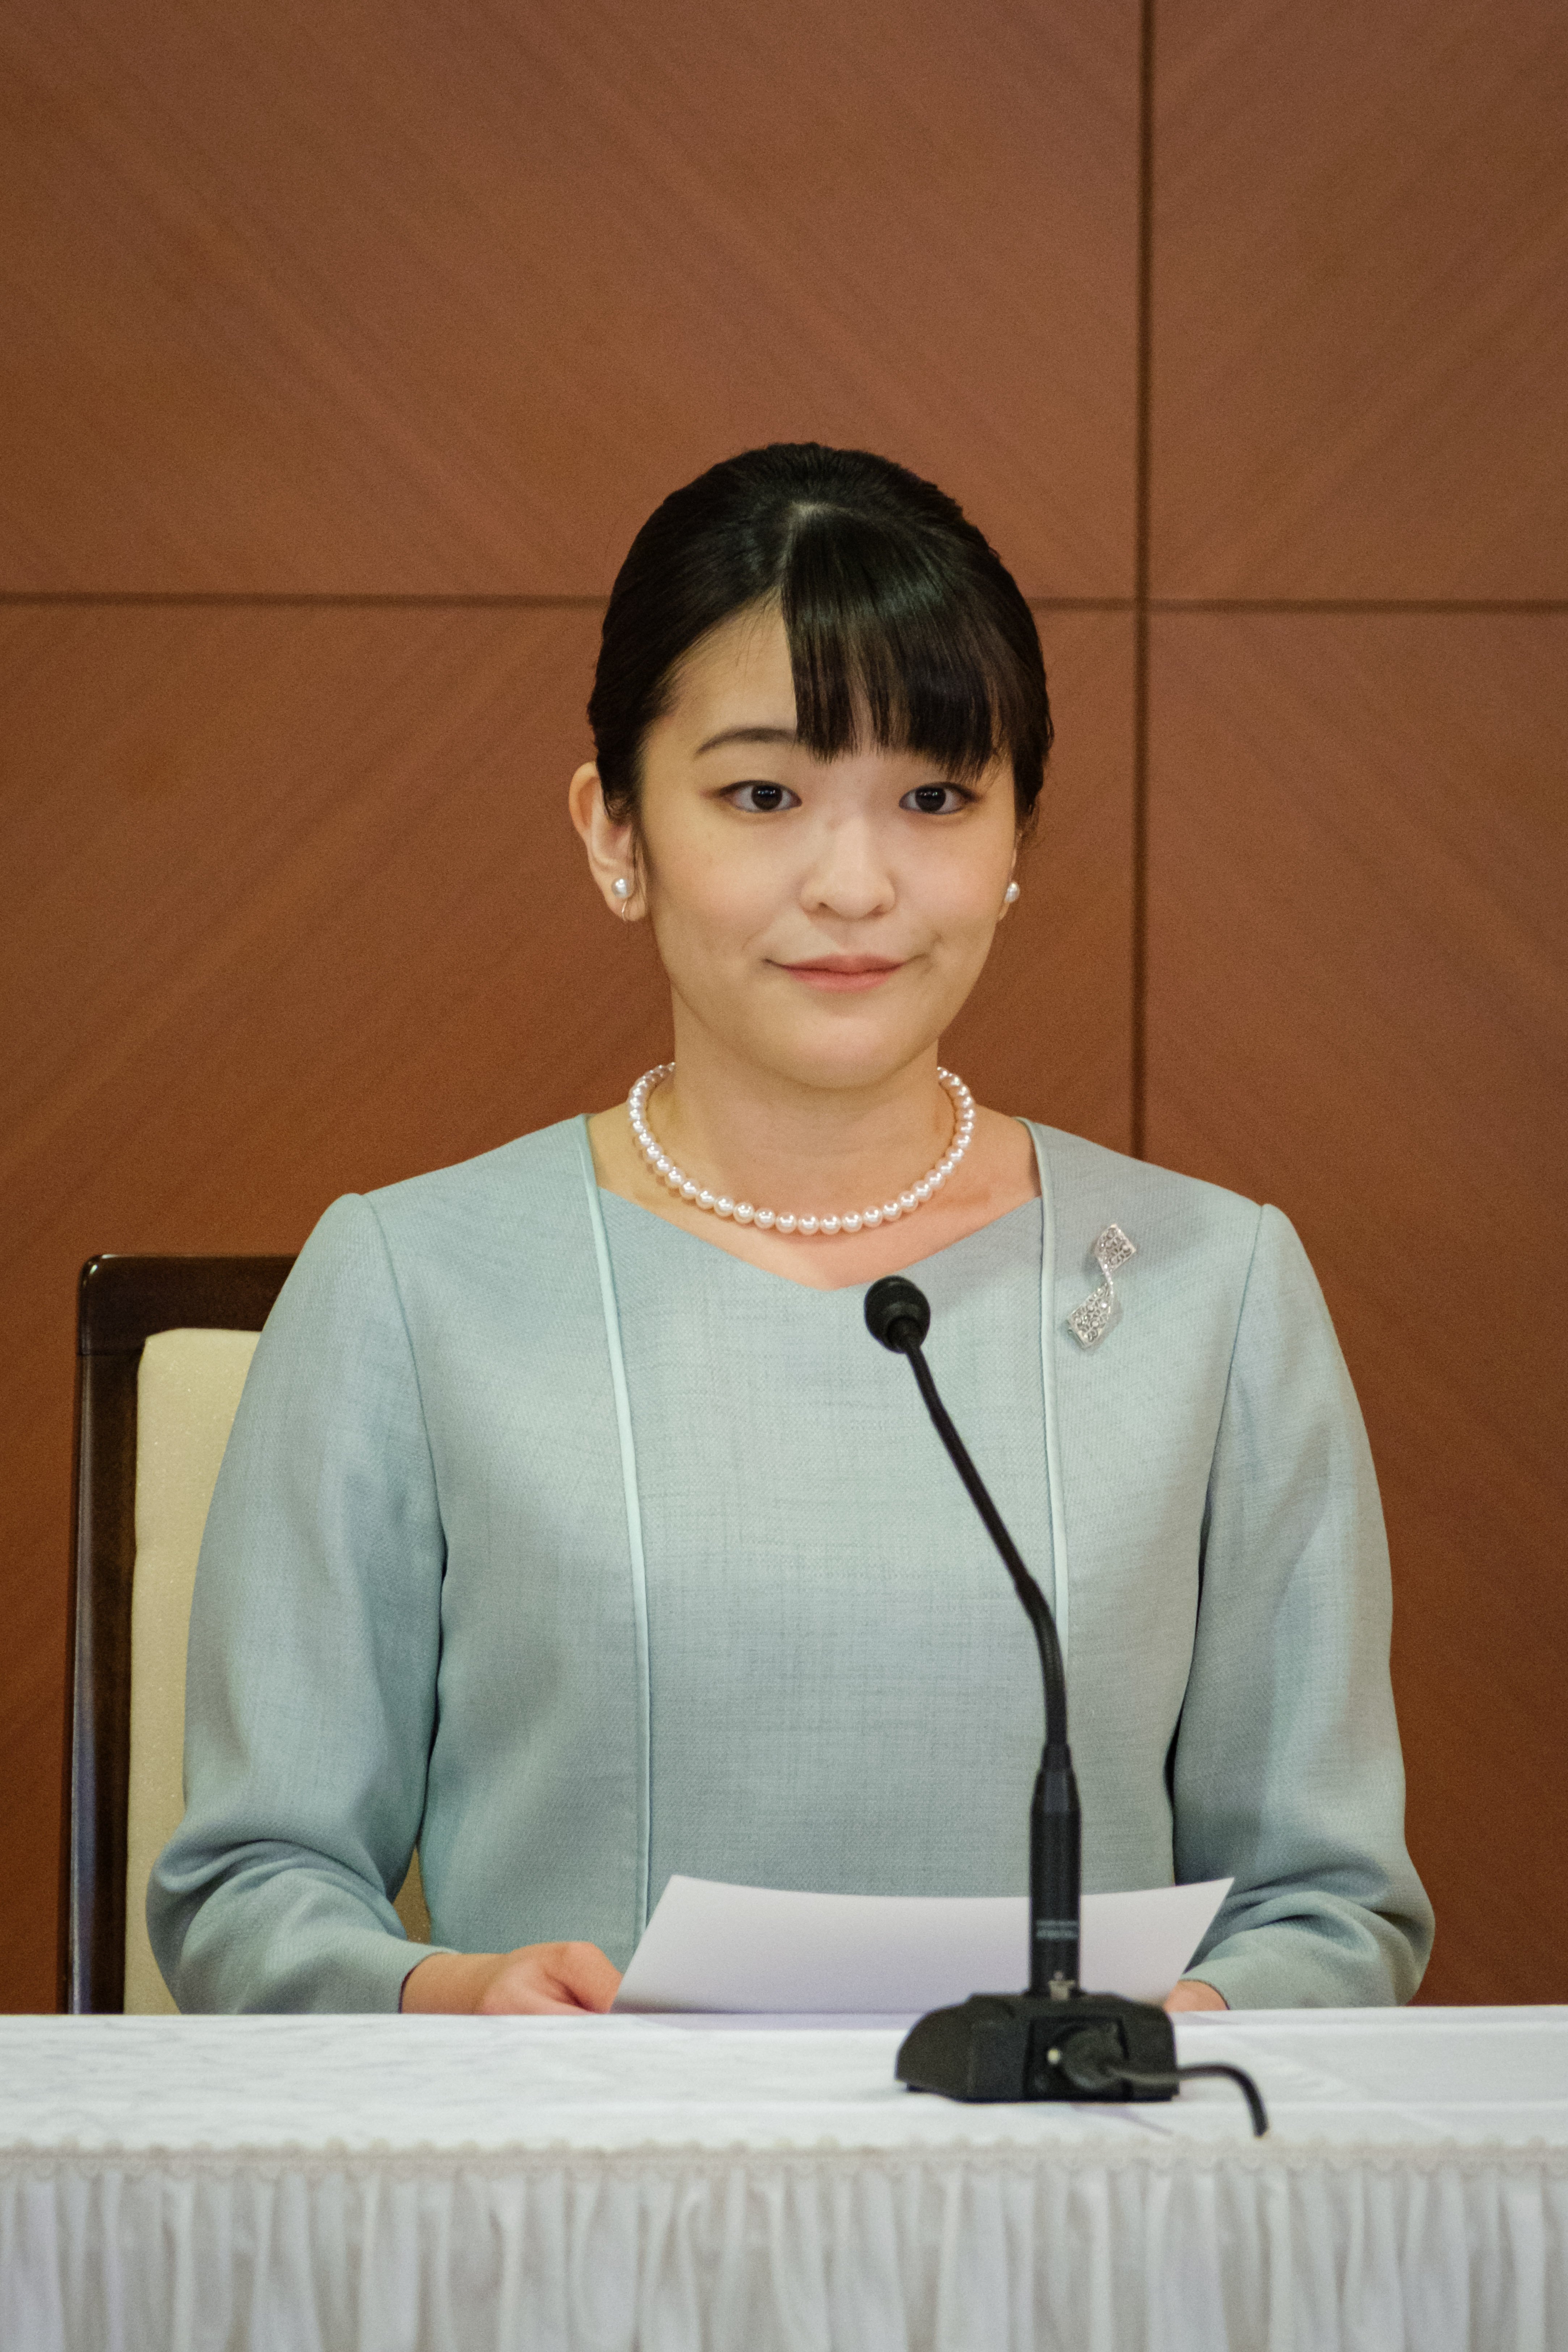 Princess Mako attends a press conference to announce her marriage registration at Grand Arc Hotel on October 26, 2021 in Tokyo, Japan | Source: Getty Images